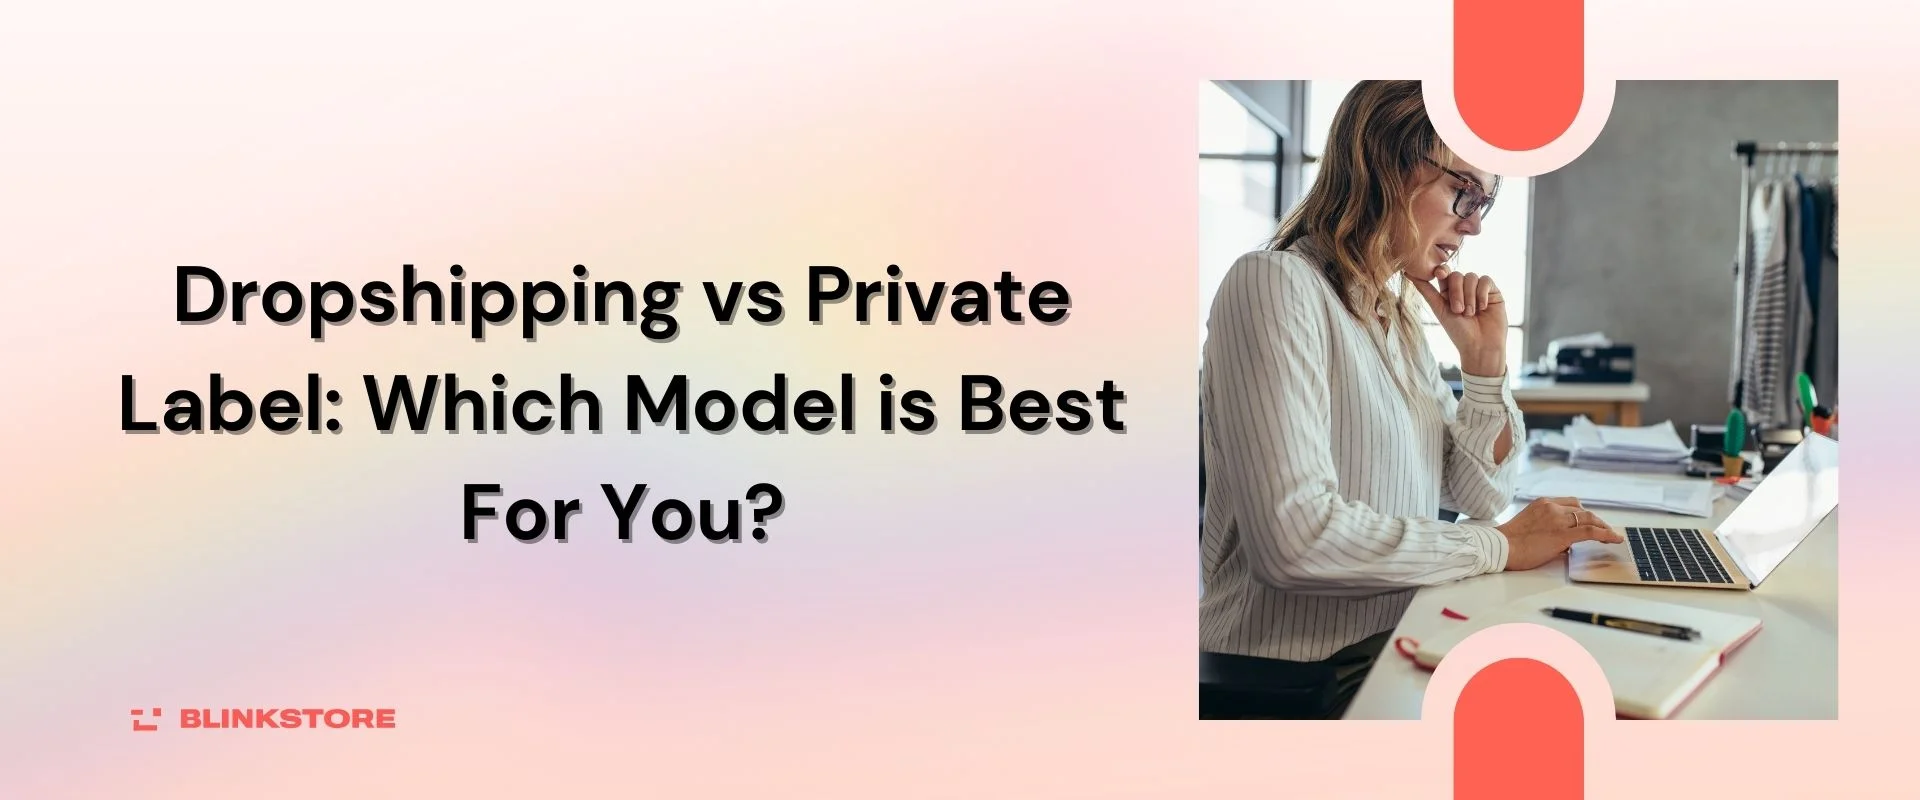 Dropshipping vs Private Label: Which Model is Best For You?